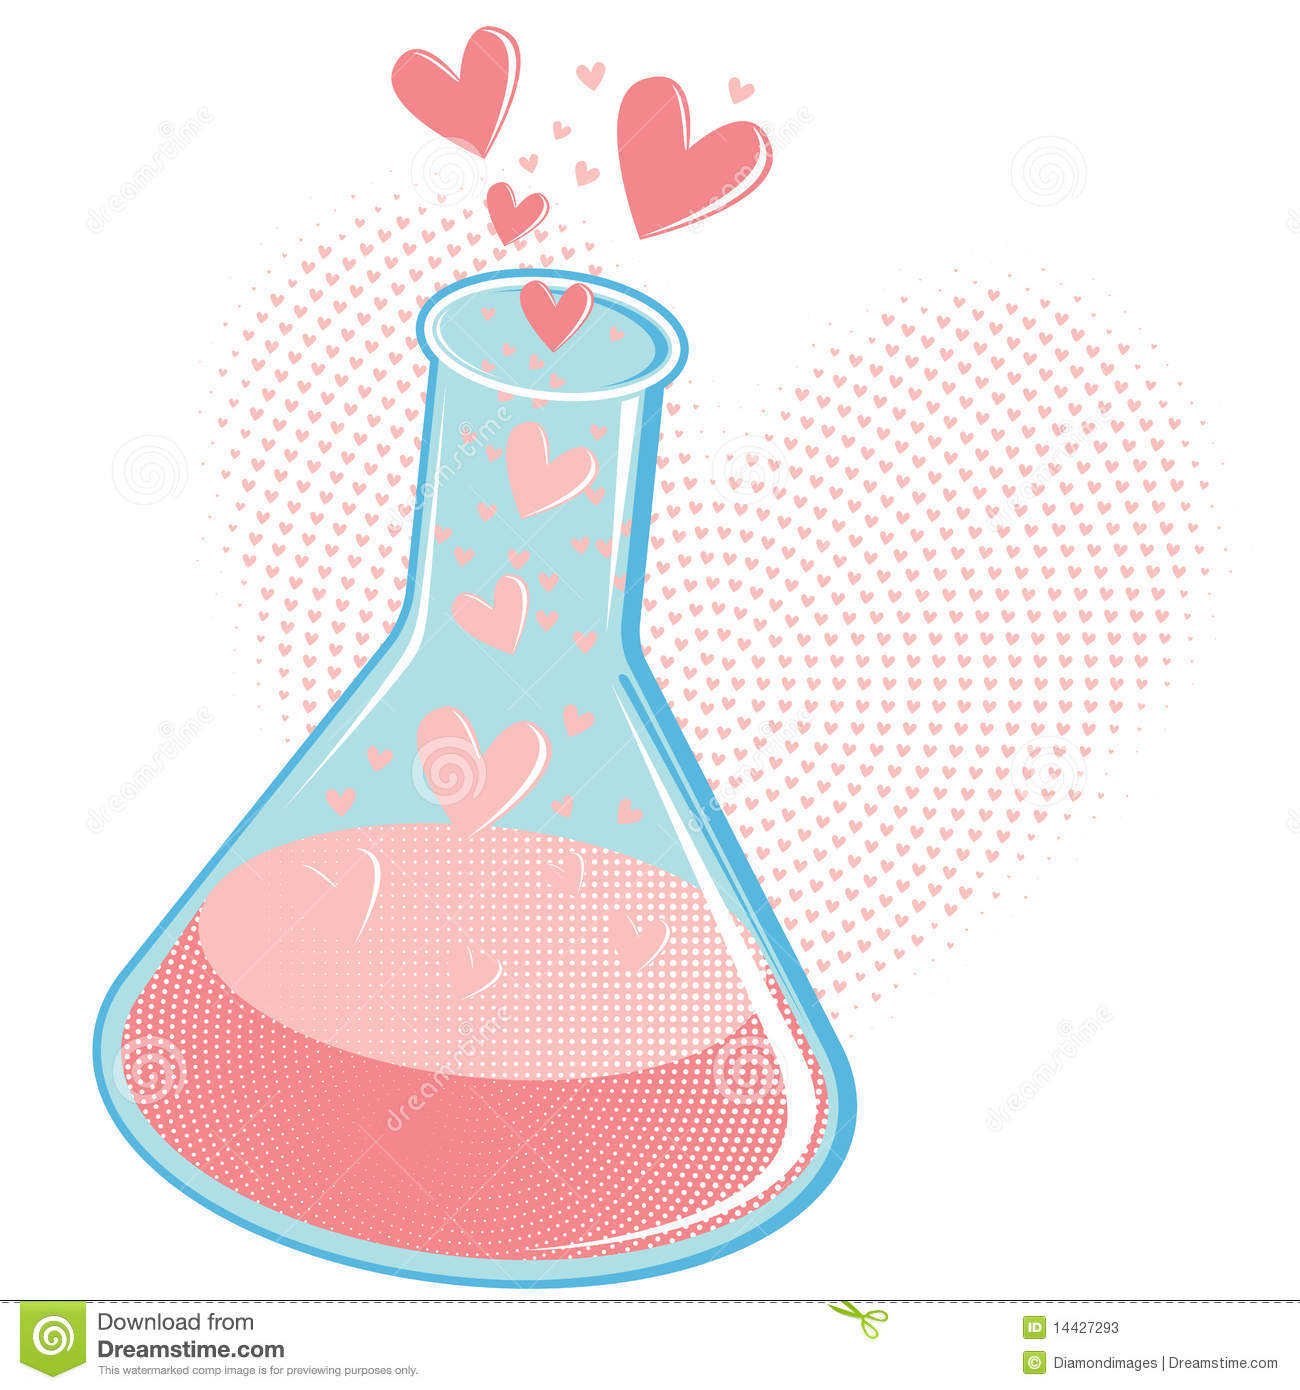 Chemistry Of Love Concept Or Love Potion Stock Photos   Image